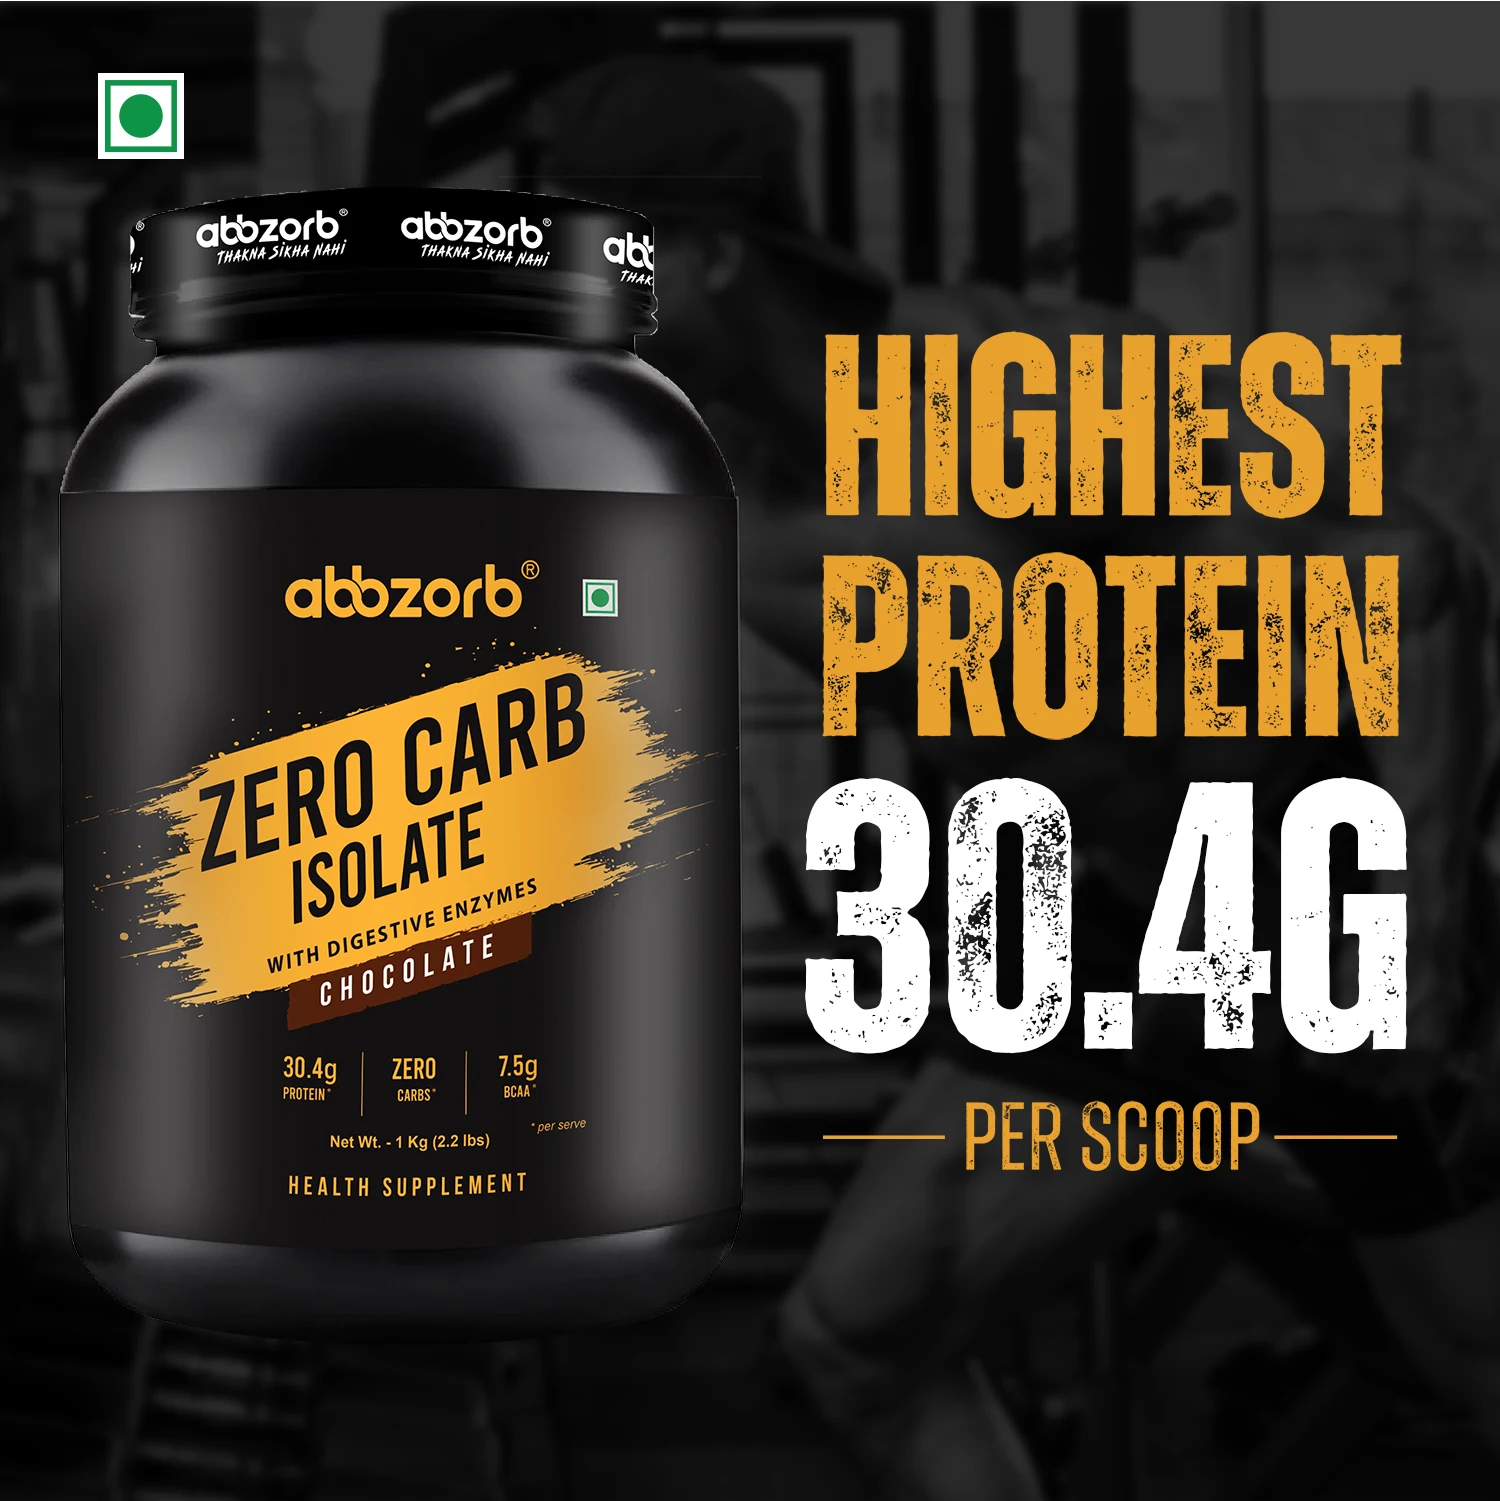 Premium Top High Quality Protein Zero Carb Chocolate Protein Powder Shake For Men & Women Available Low Carb Protein ( 1 KG )